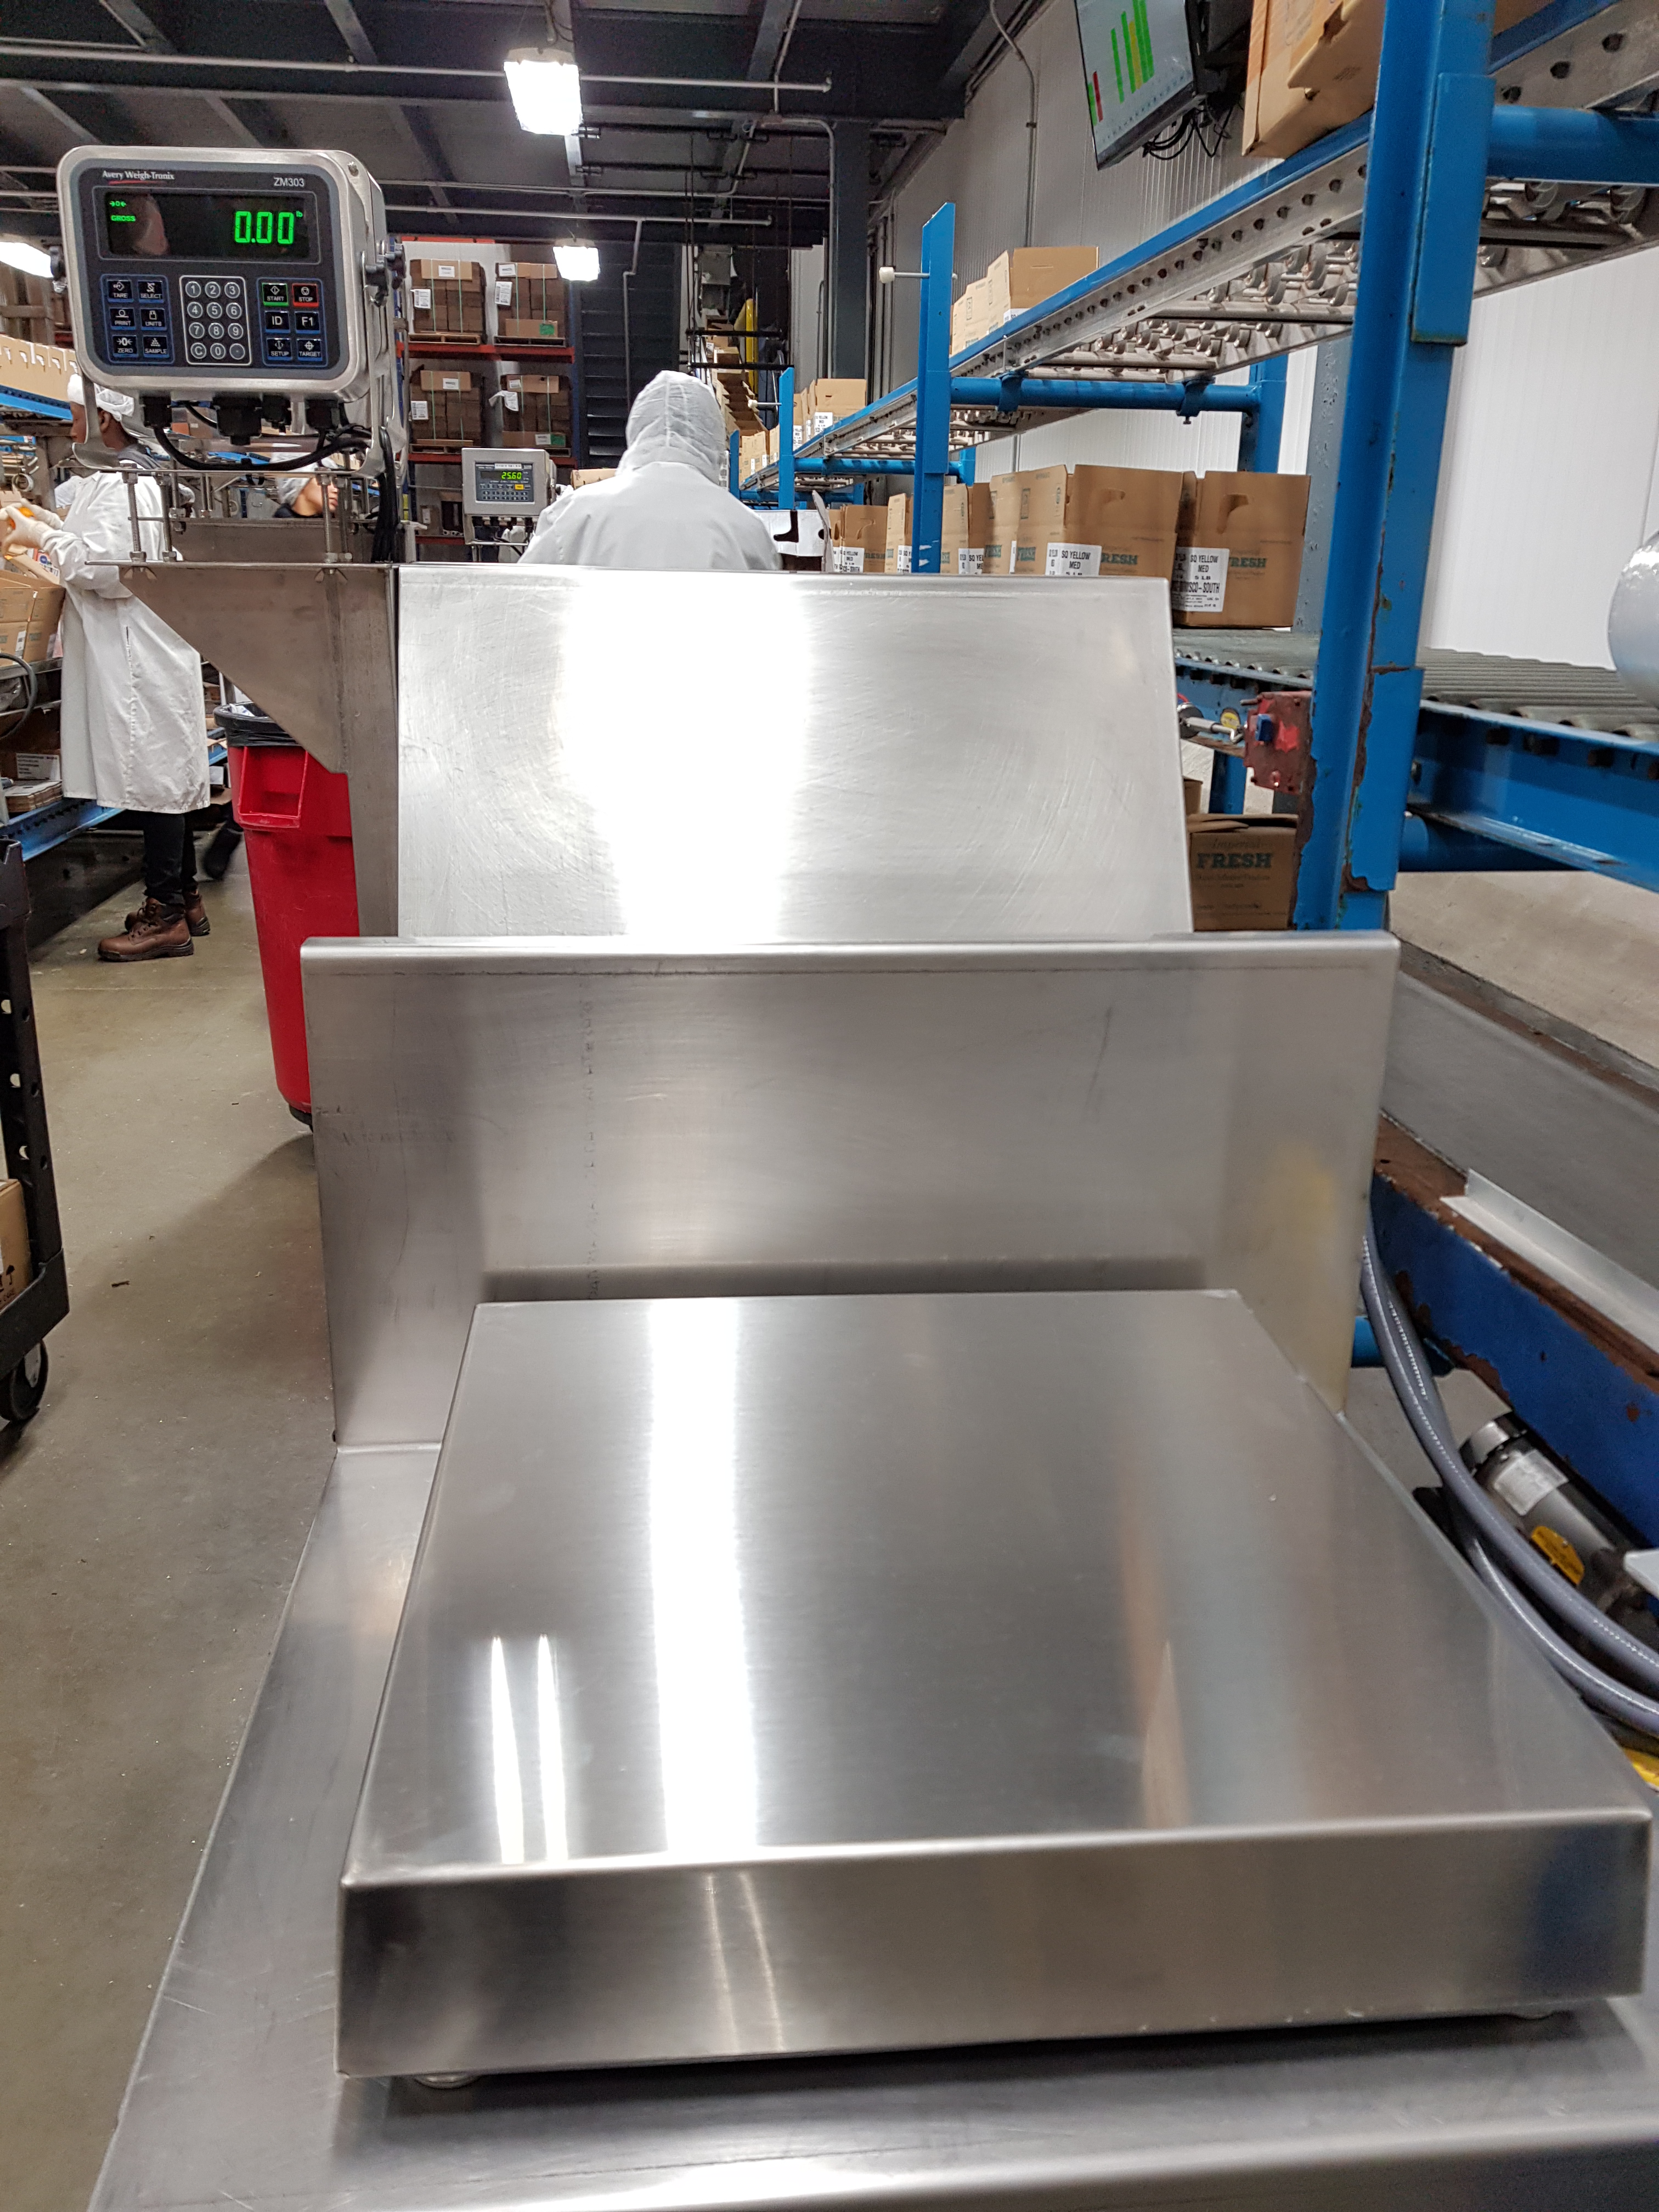 Avery Weigh tronix ZM 303 scale been used in a food processing envitoment